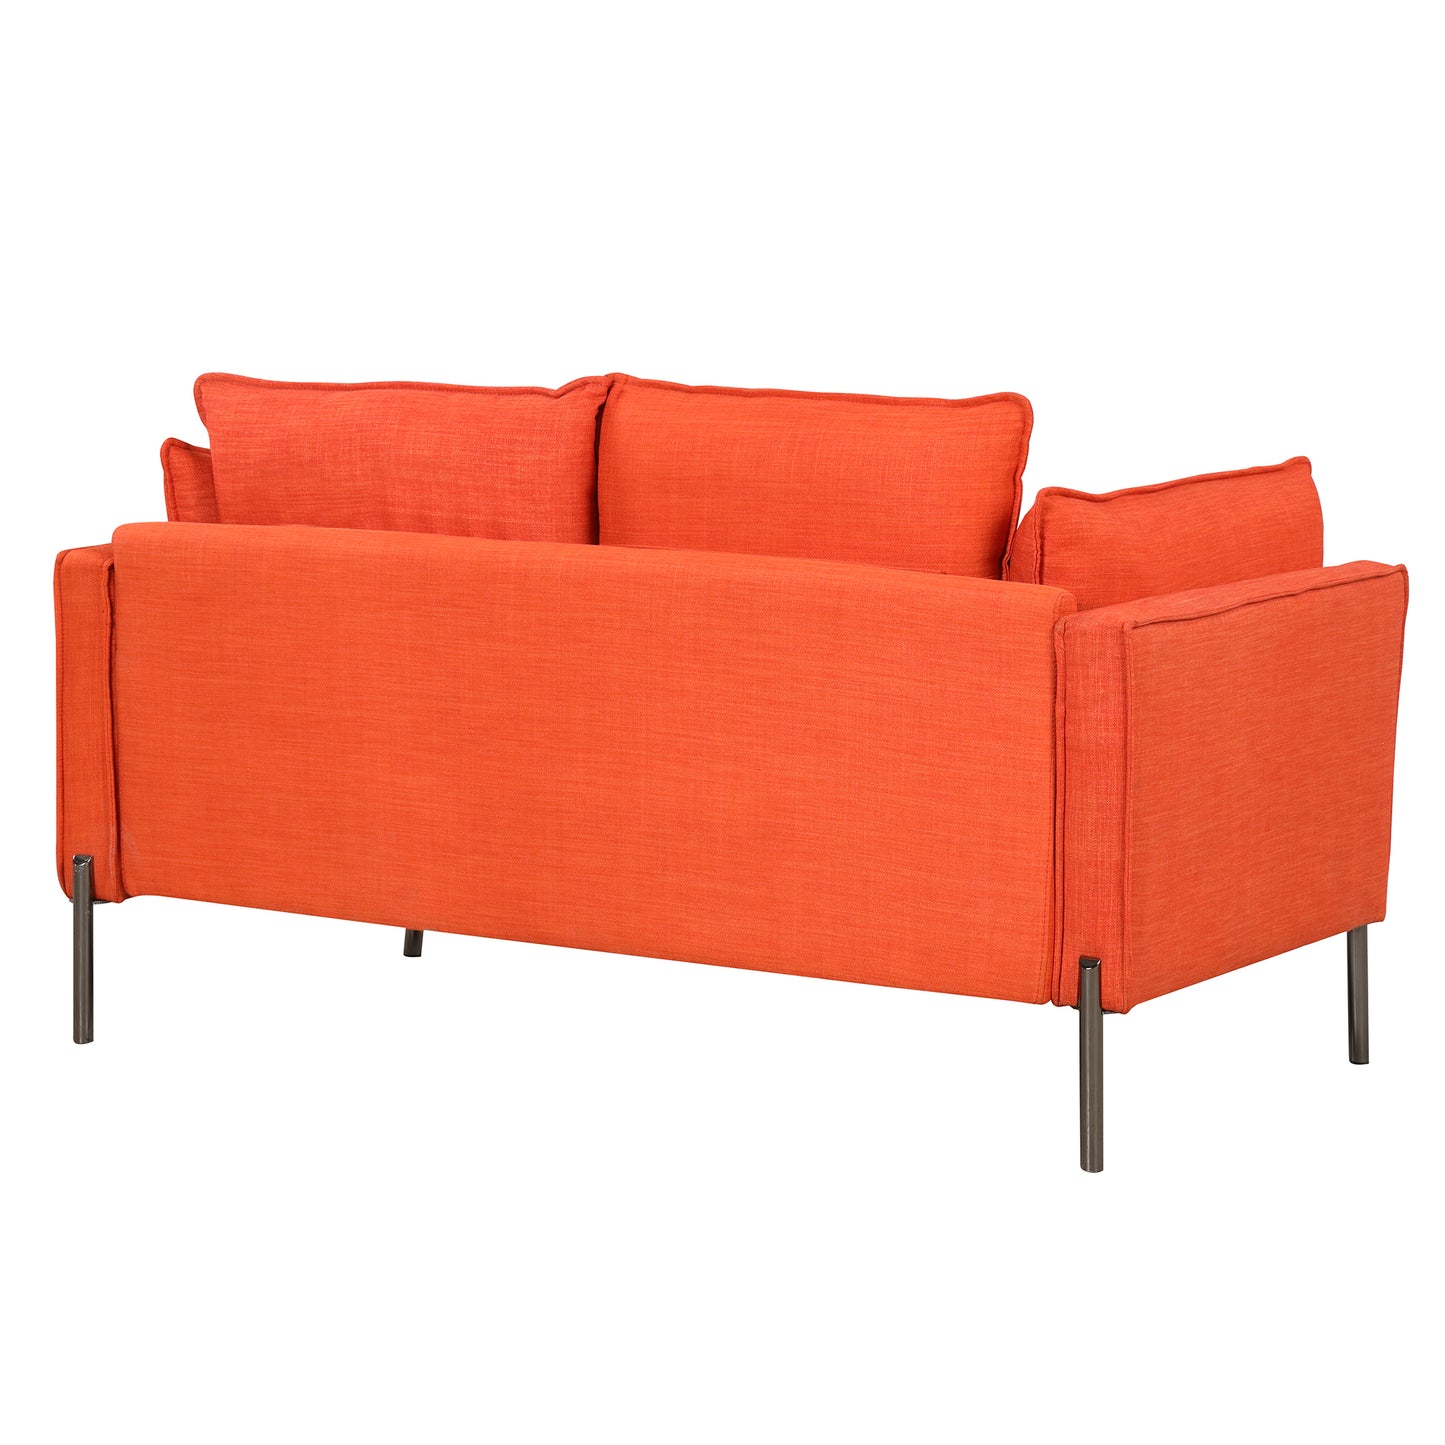 56" Modern Style Sofa Linen Fabric Loveseat Small Love Seats Couch for Small Spaces,Living Room,Apartment